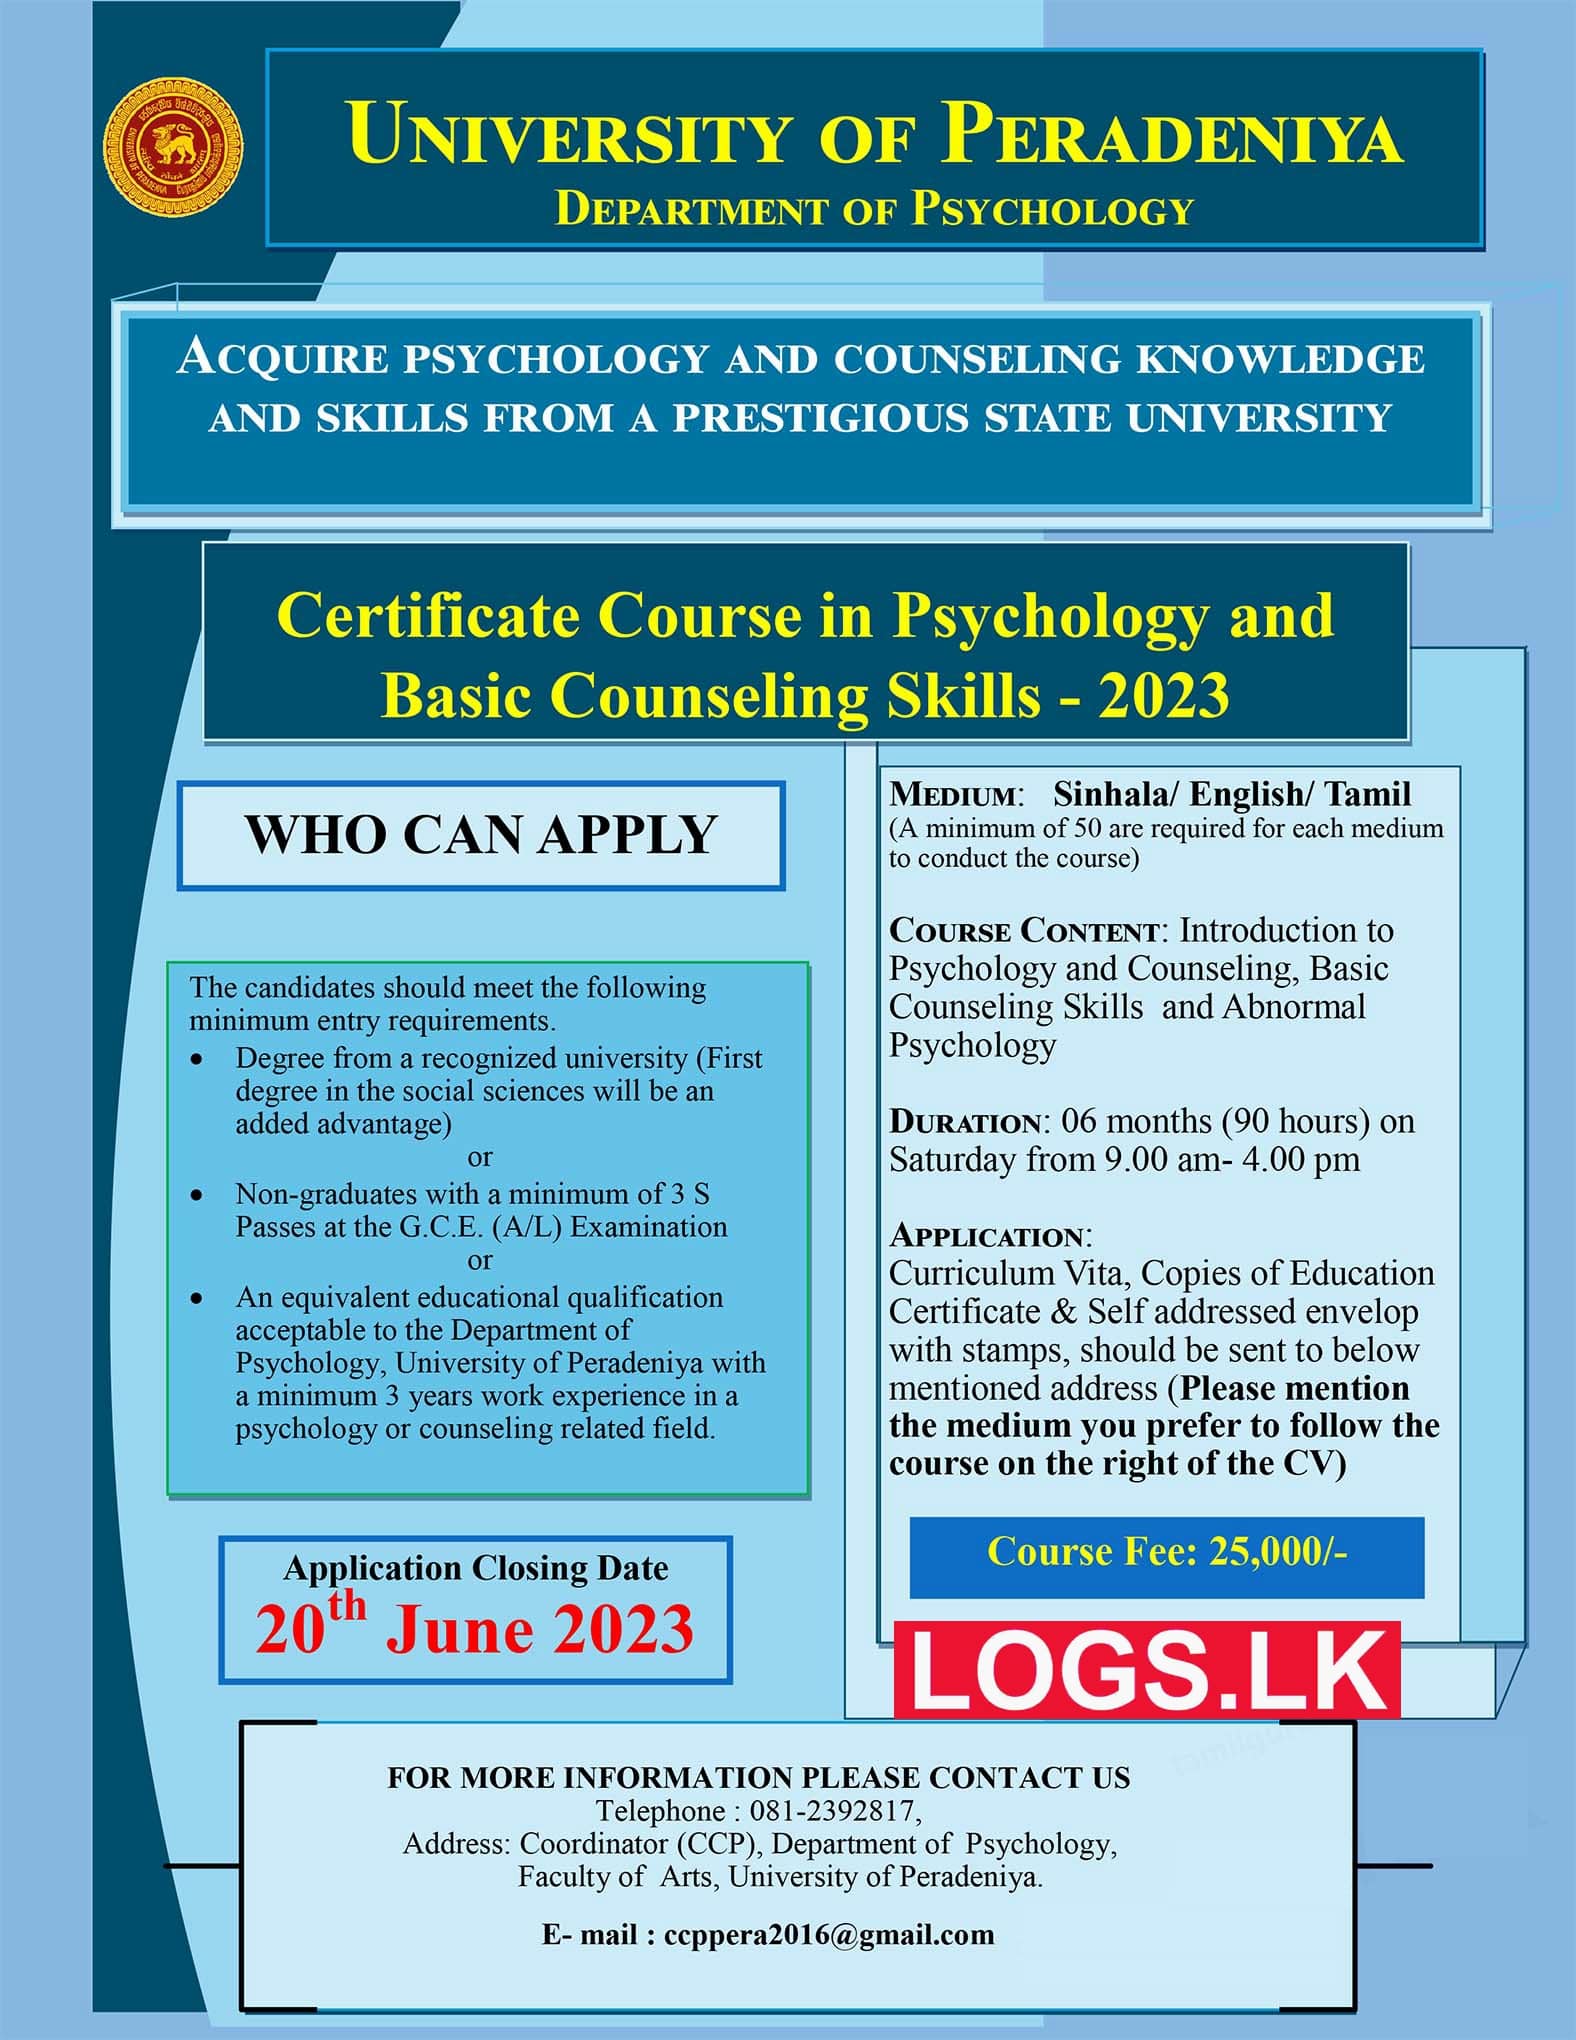 Certificate Course in Psychology & Basic Counseling Skills 2023 - University of Peradeniya Application Form, Details Download